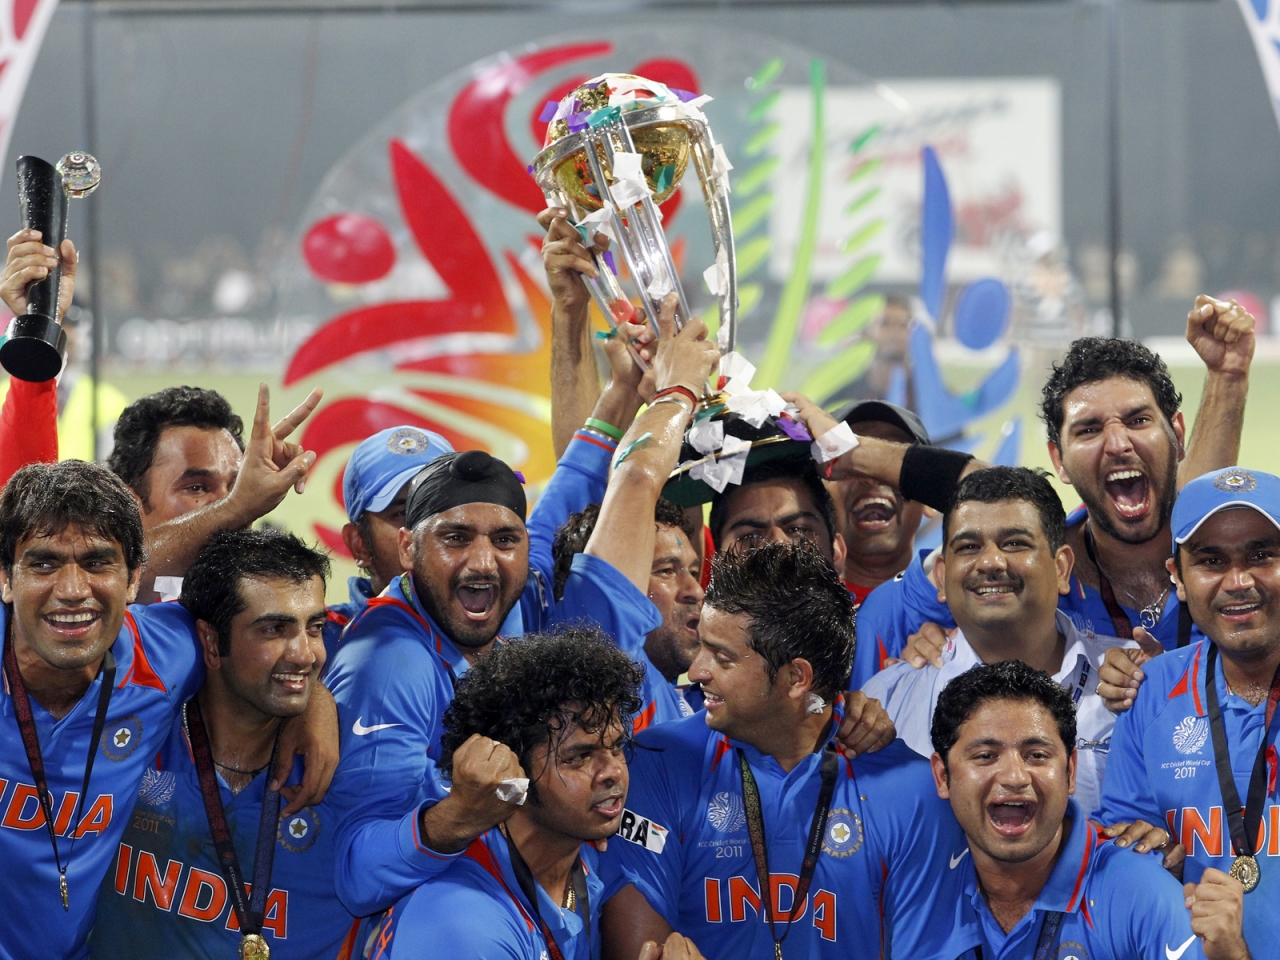 Cricket India Team for 1280 x 960 resolution